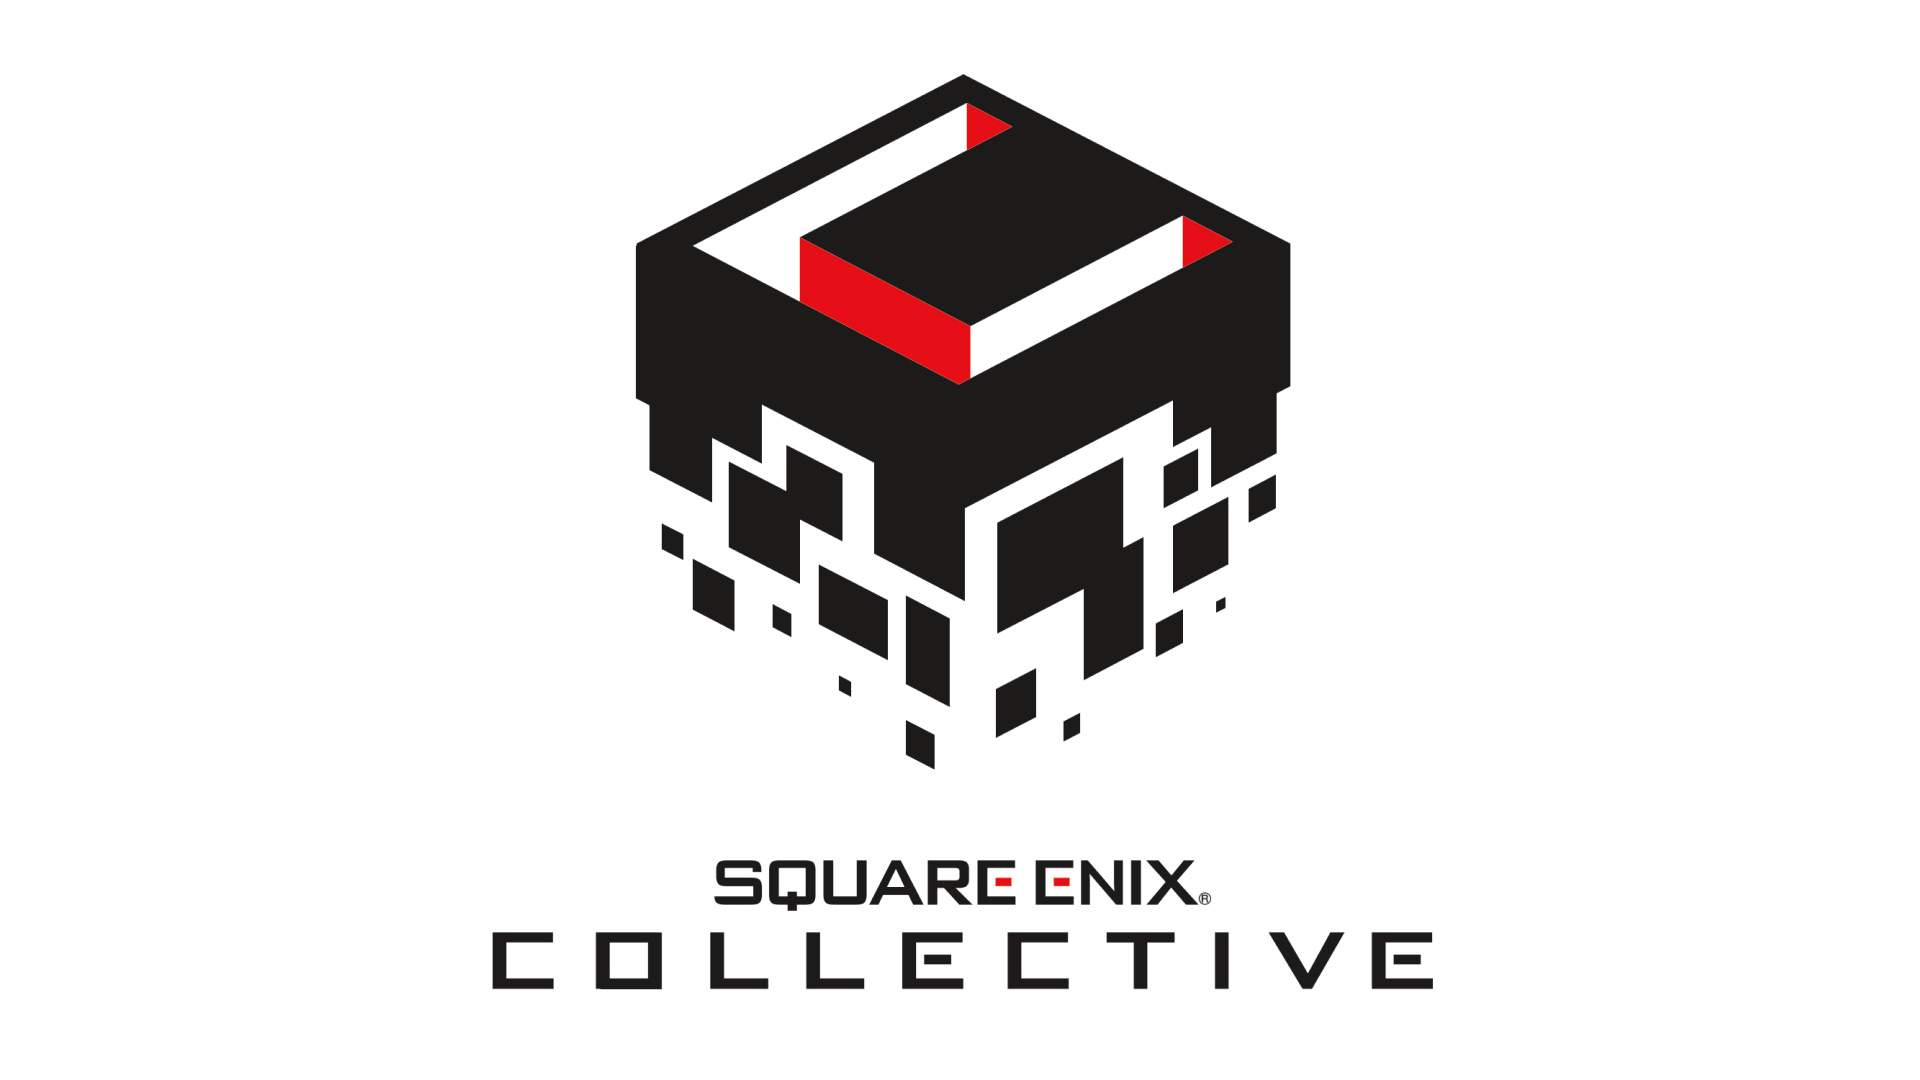 Square Enix NA Support on X: Support Tip! You always have access